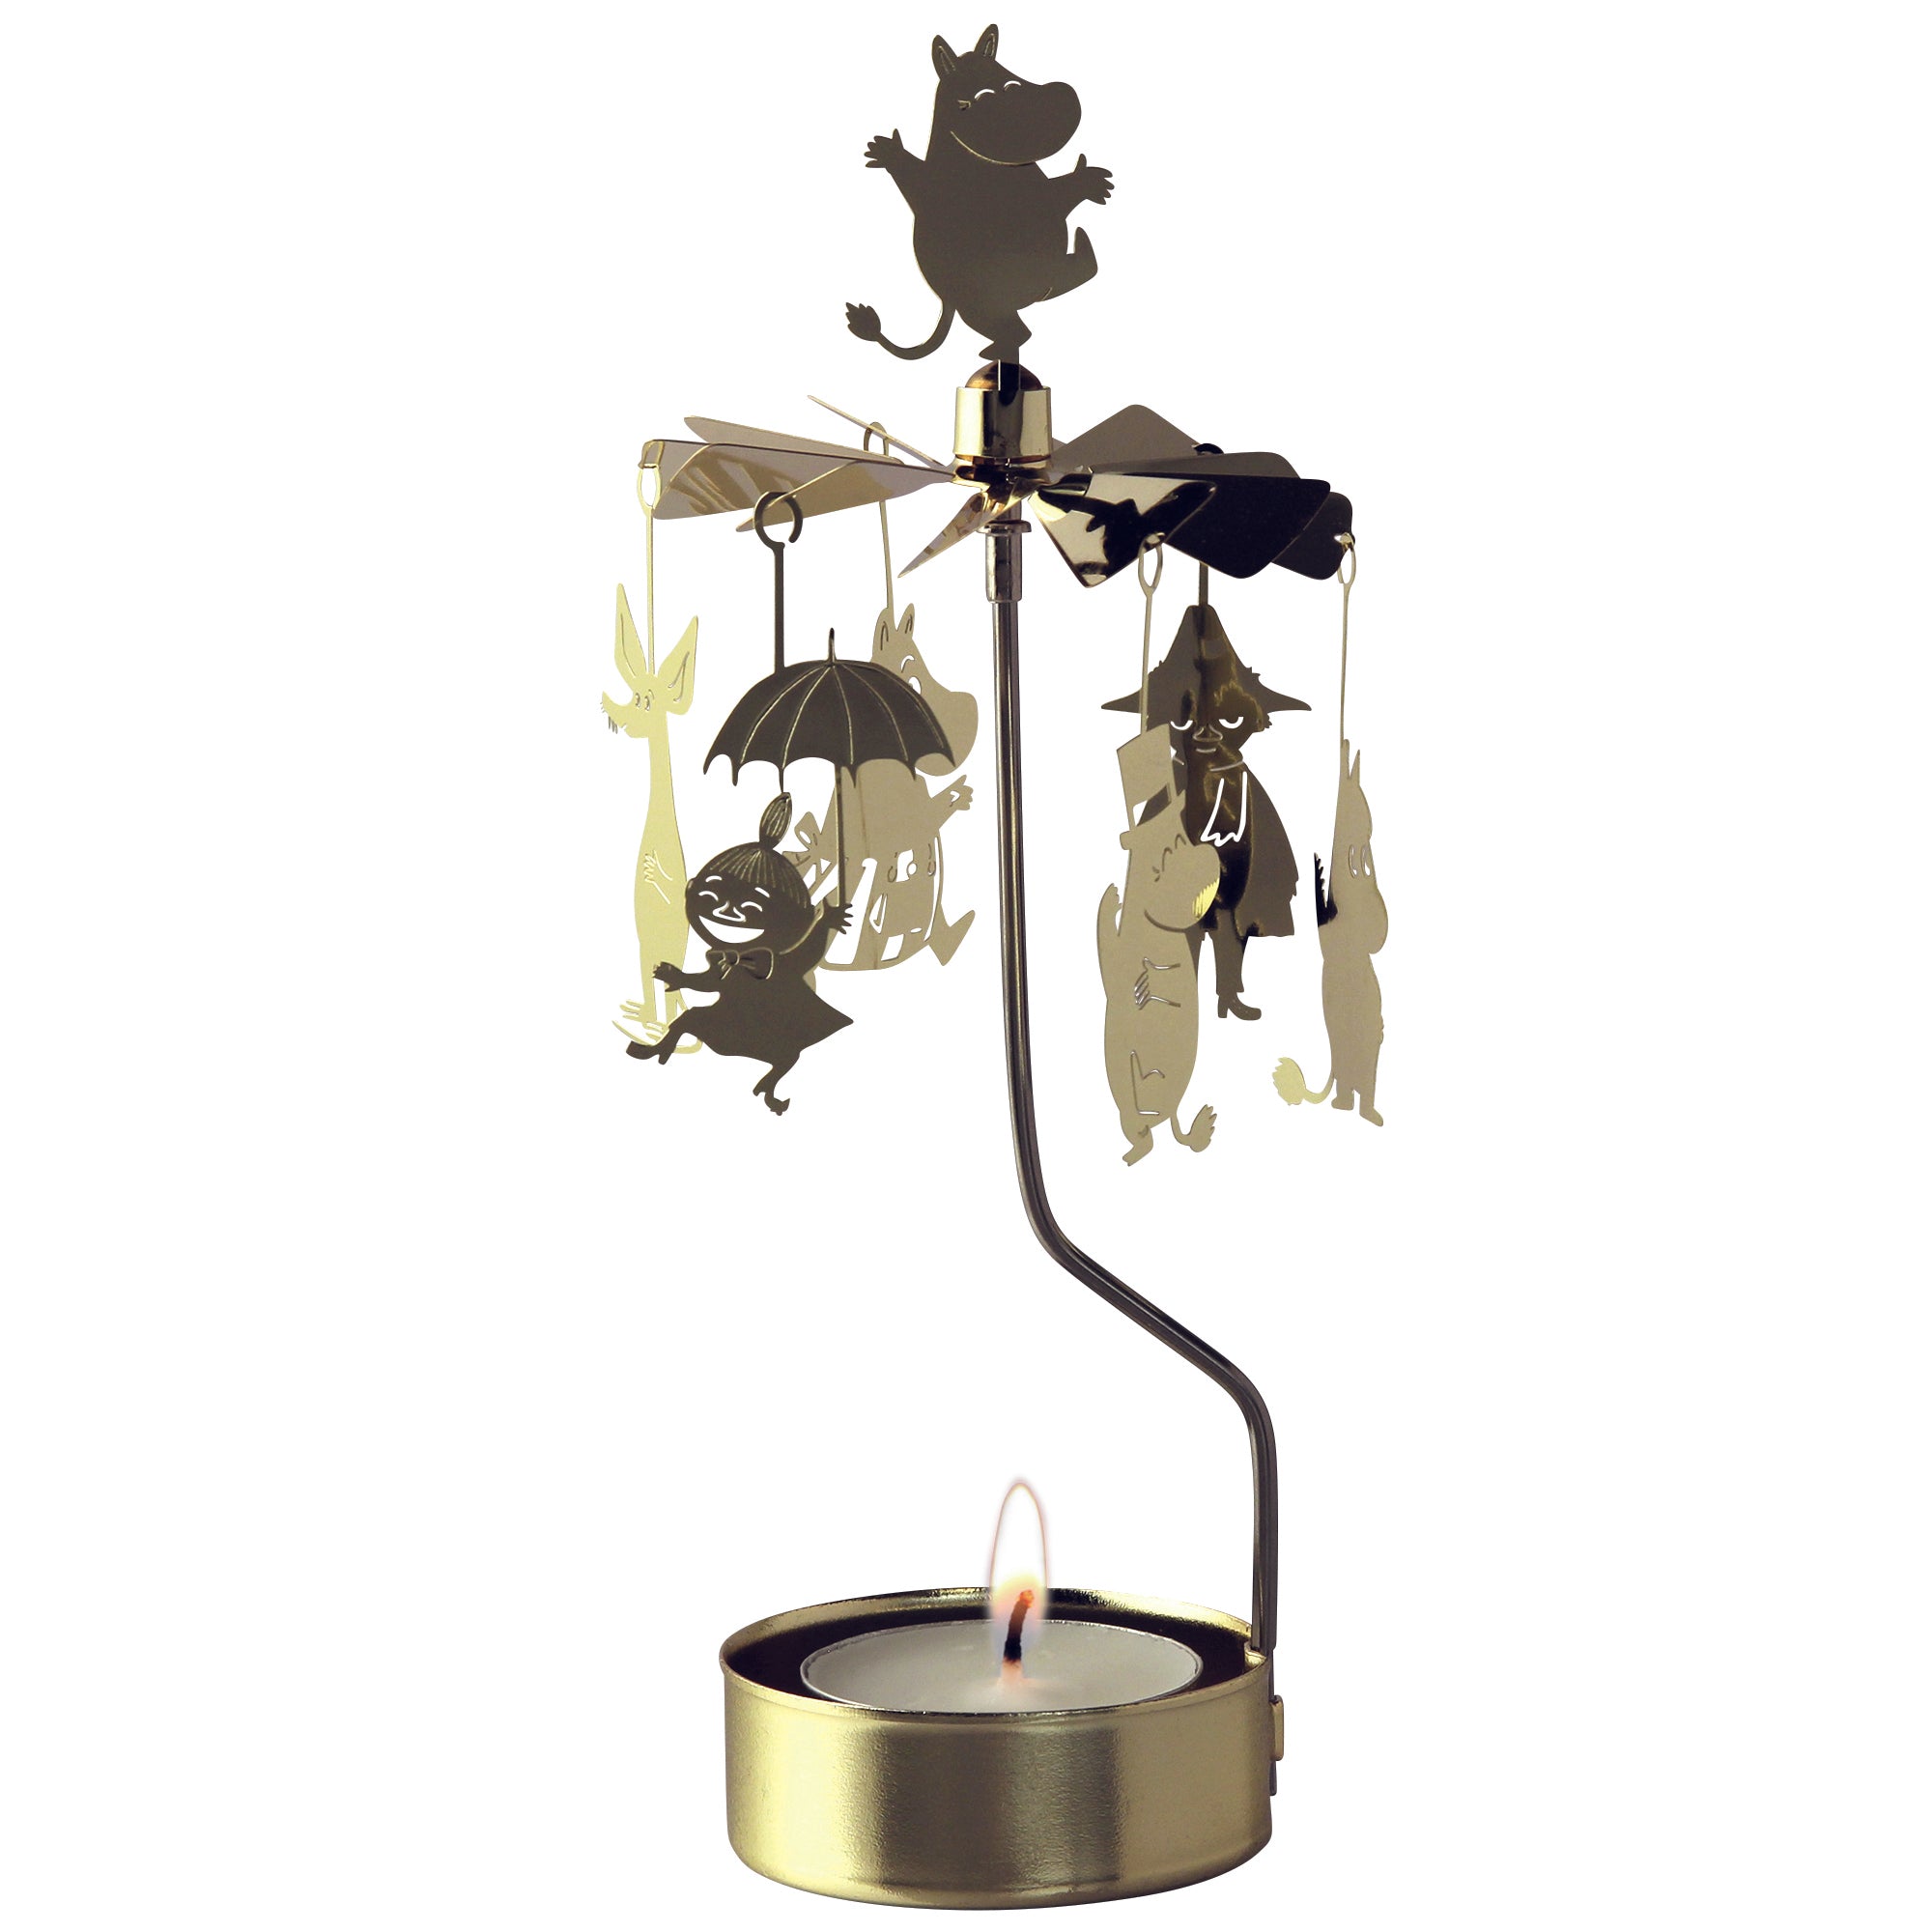 Gold Rotary Candle with Moomin Characters hanging and a lite flame. Moomin is standing on the top of the candle holder.